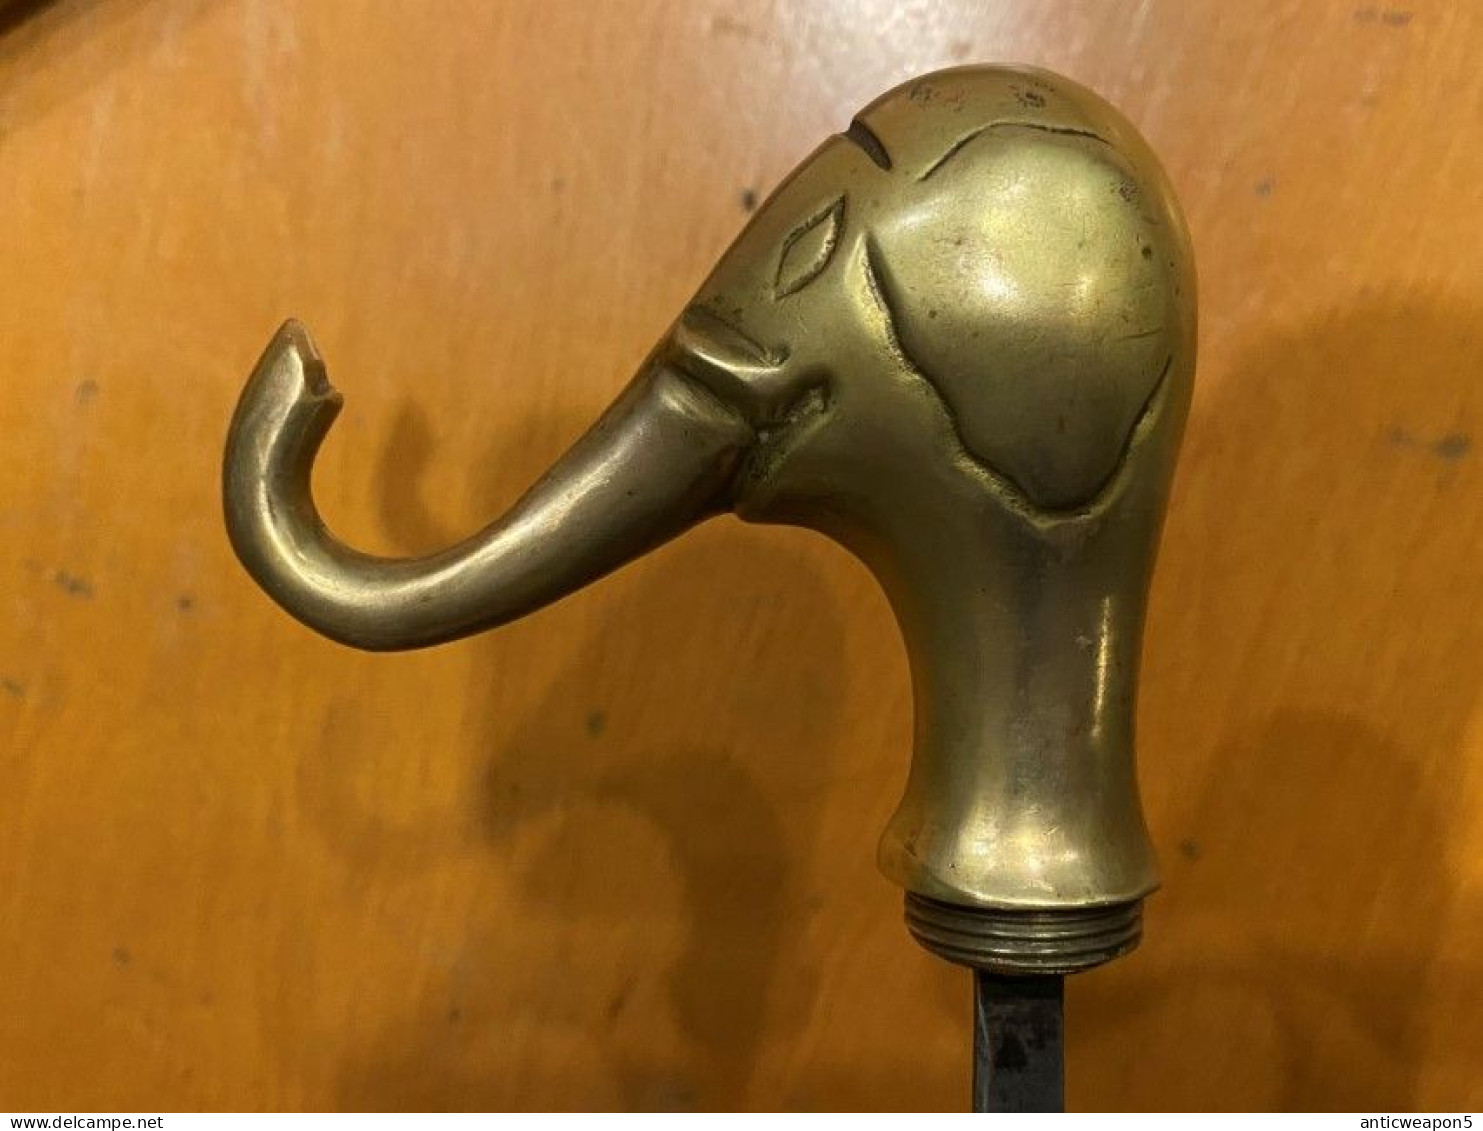 A cane with a pike inside and a heavy brass handle in the shape of an elephant's head. Europe. Around 1940. (H311)